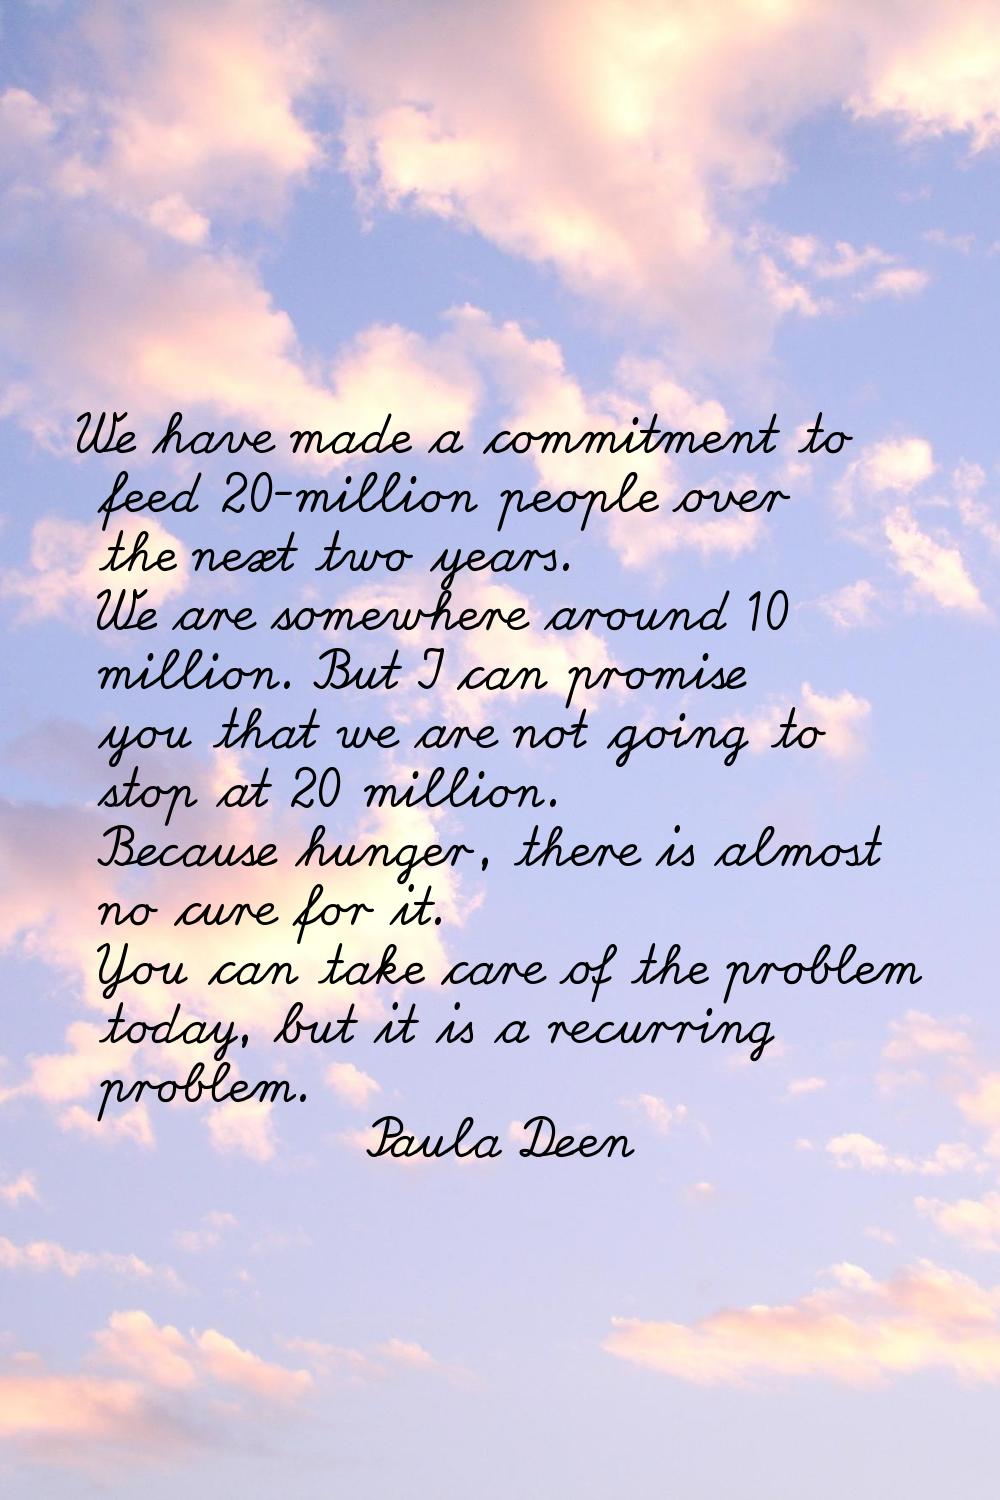 We have made a commitment to feed 20-million people over the next two years. We are somewhere aroun